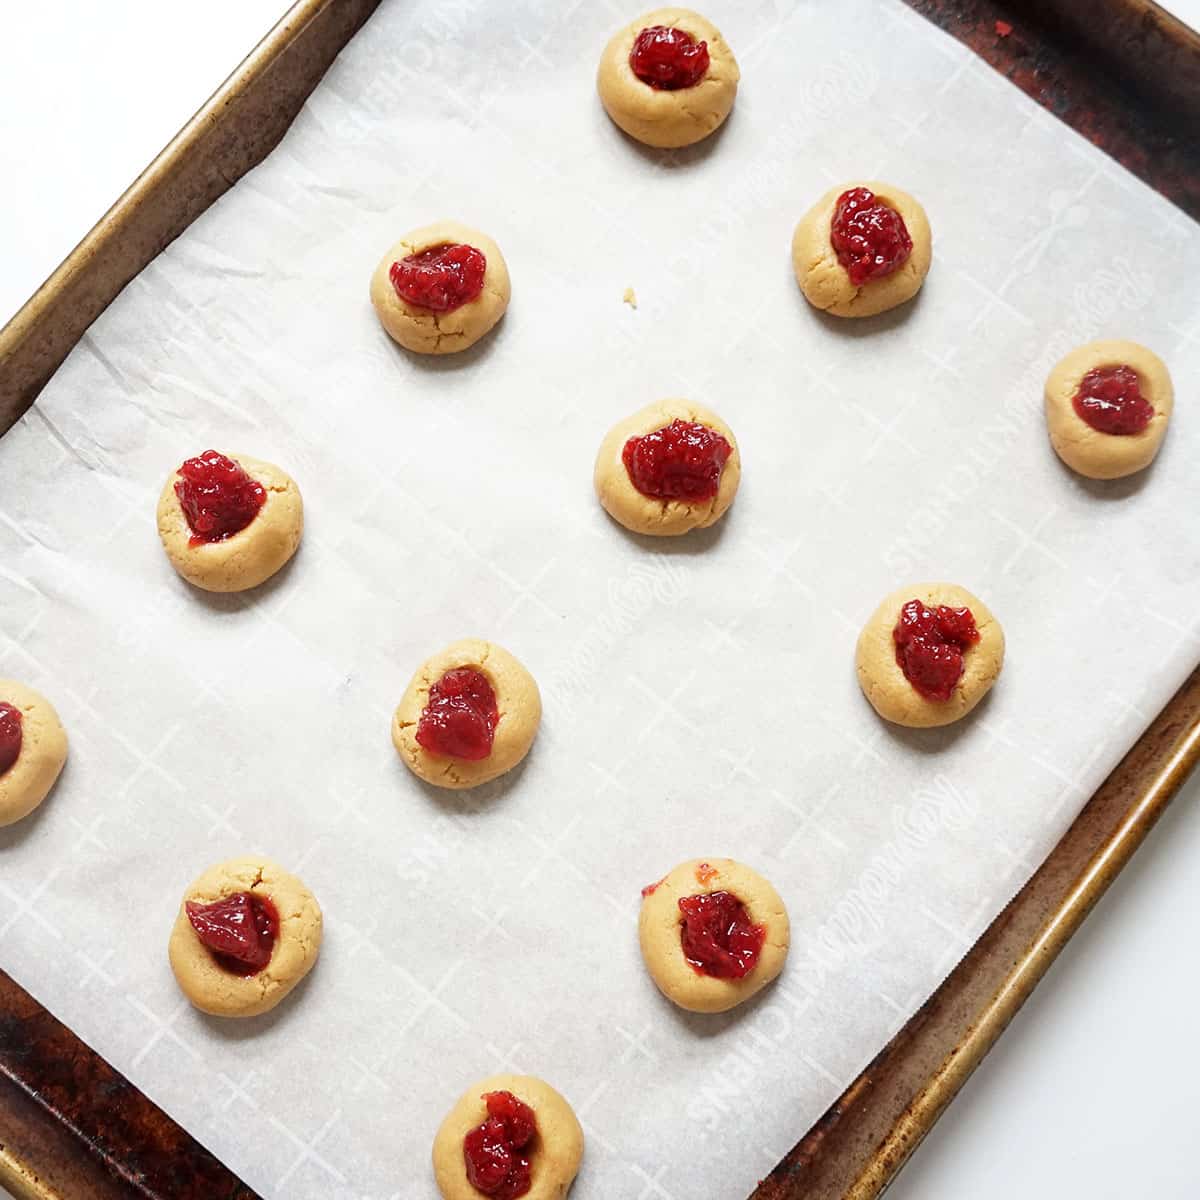 raspberry jelly and peanut butter cookies on baking tray